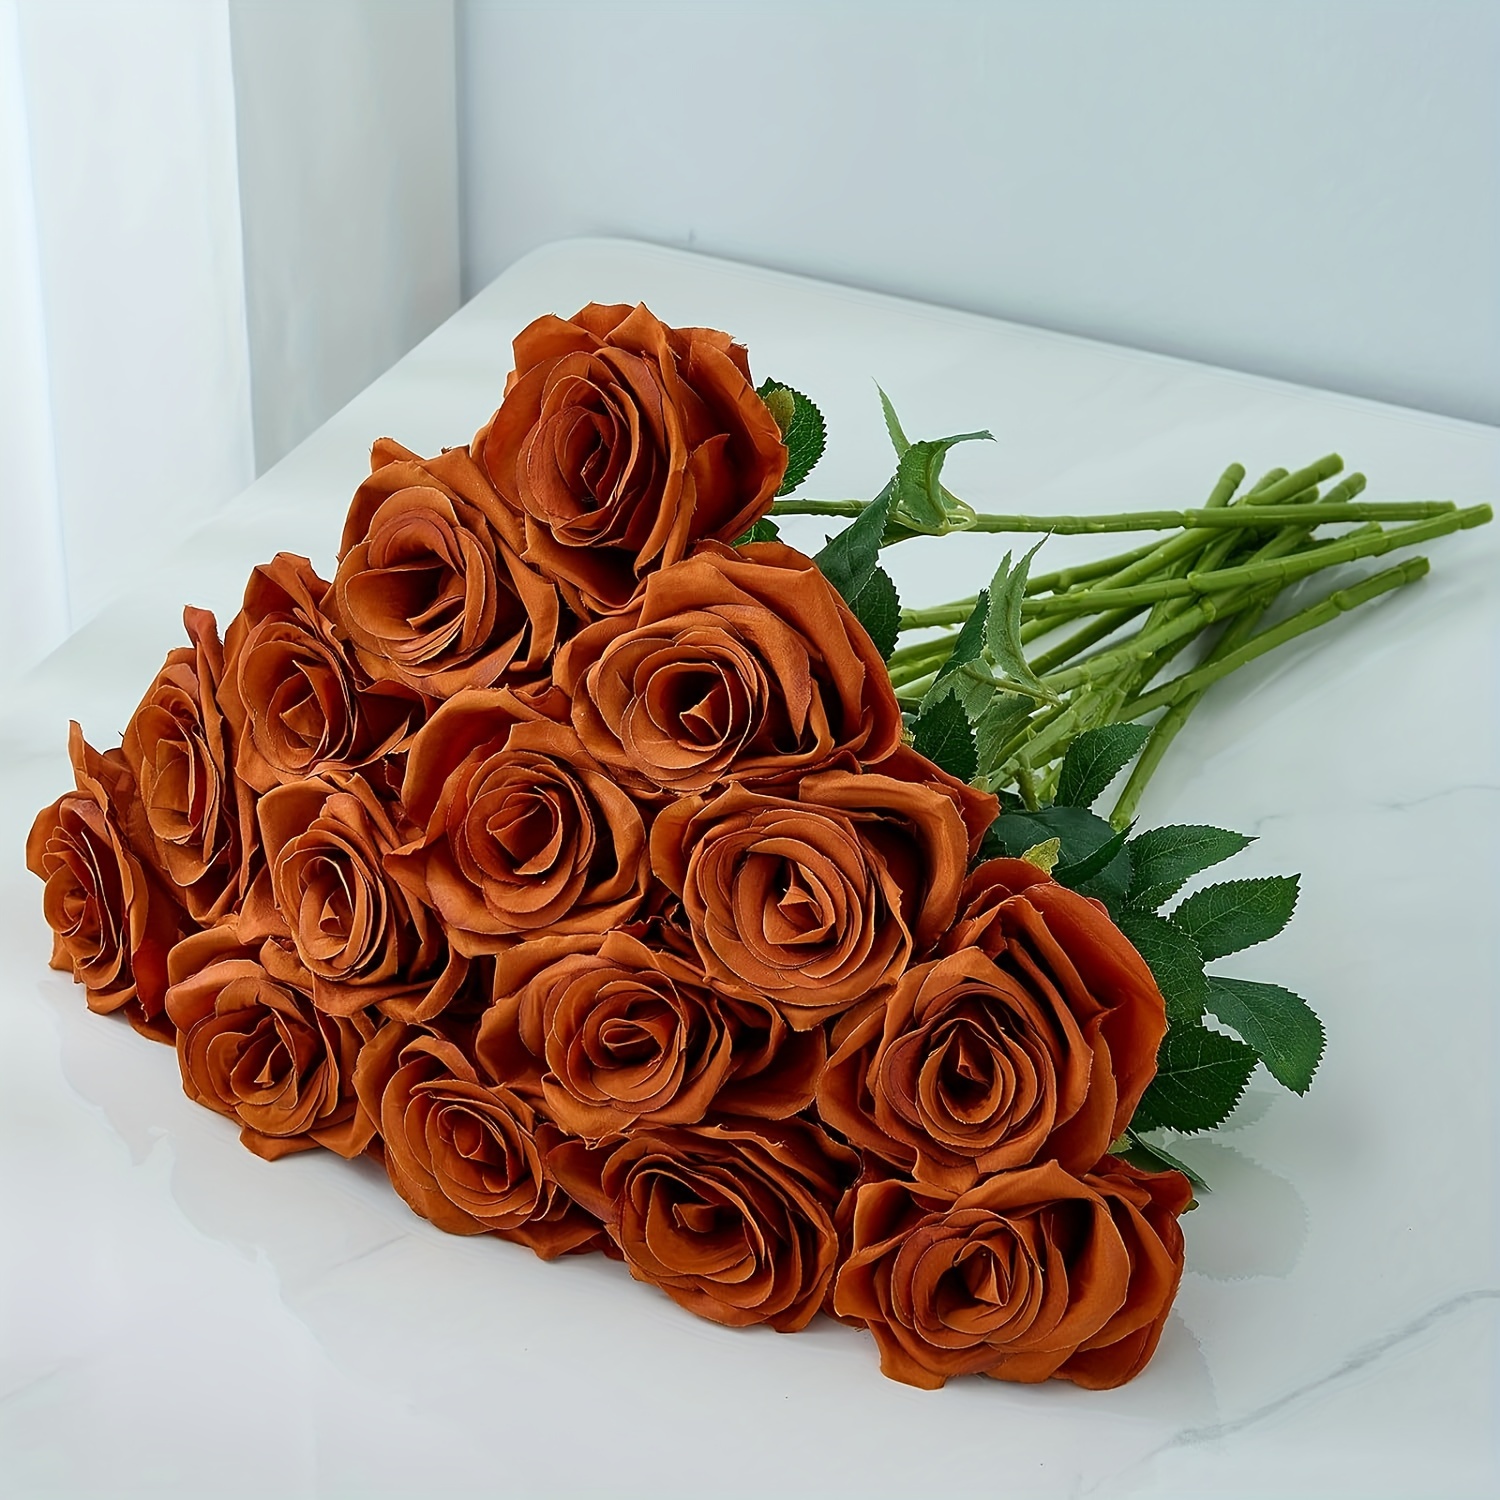 

Set Of 6 Caramel Fabric Artificial Roses With Long Stem And Lifelike Leaves - Realistic Faux Floral Bouquet For Home Decor And Accents